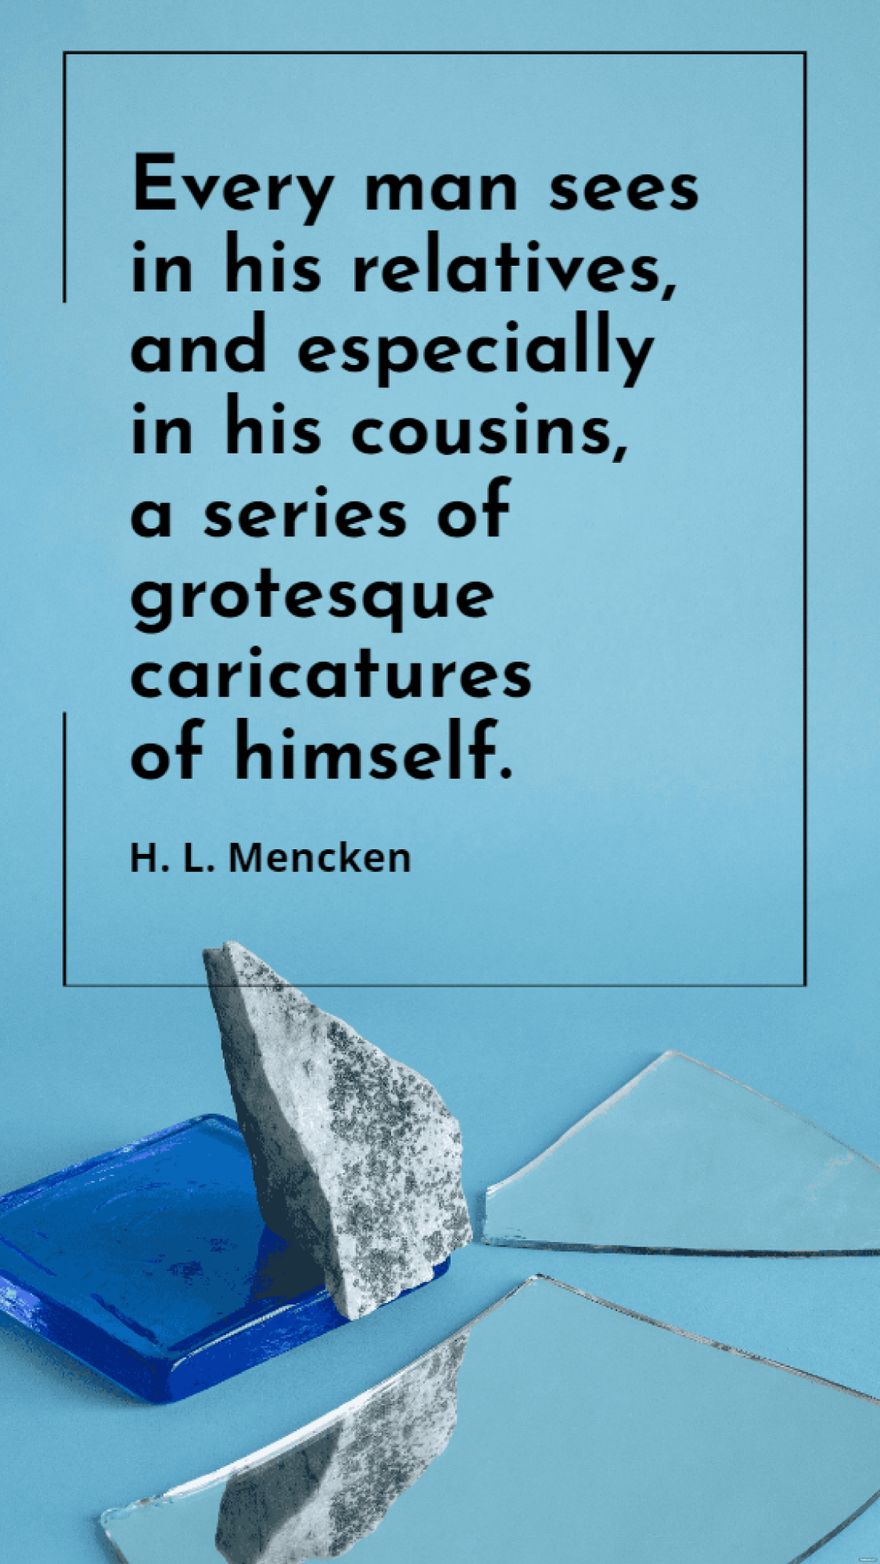 H. L. Mencken - Every man sees in his relatives, and especially in his cousins, a series of grotesque caricatures of himself.